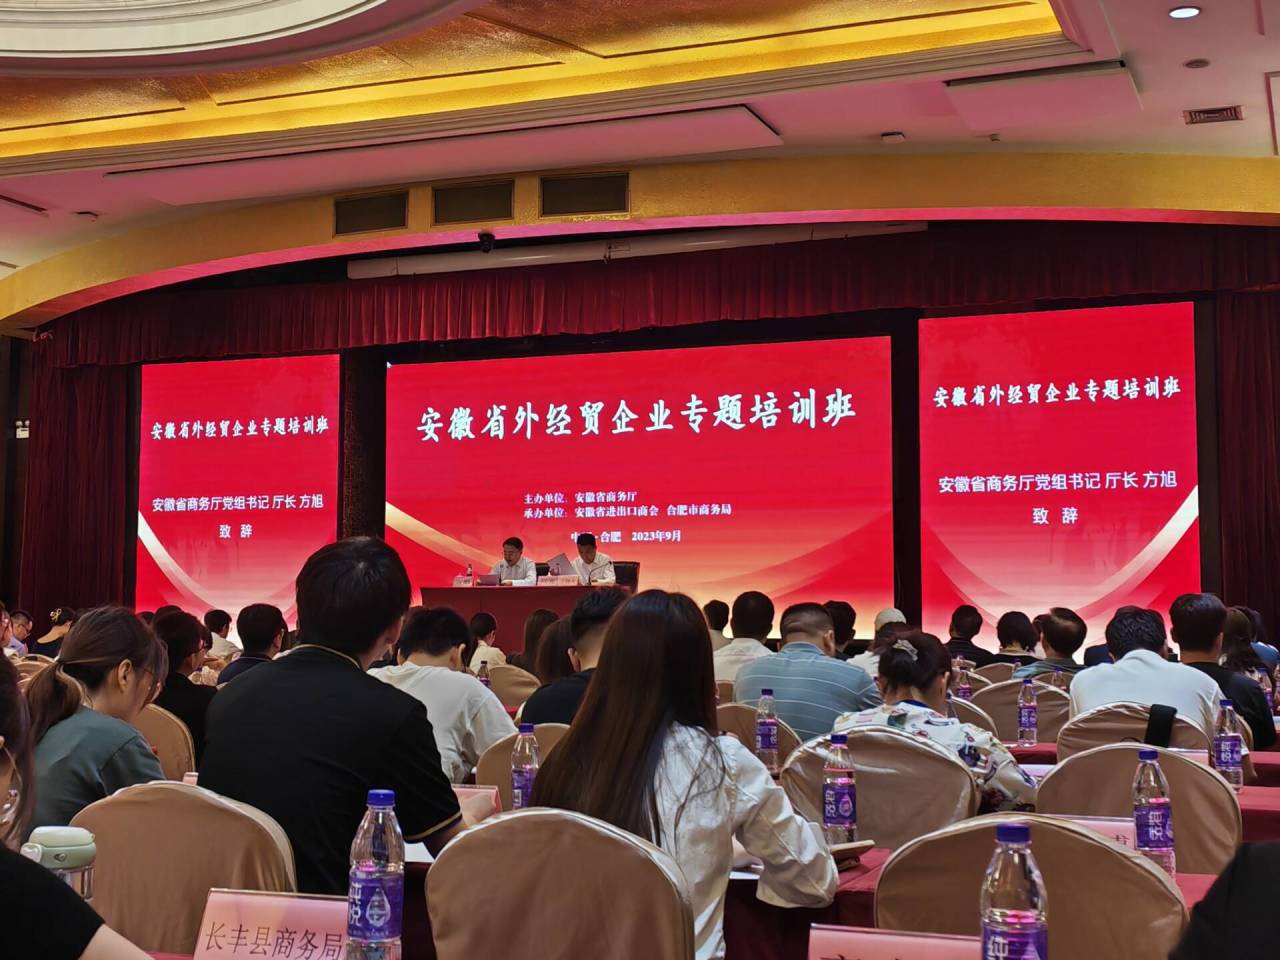 The company participated in Anhui foreign trade conference